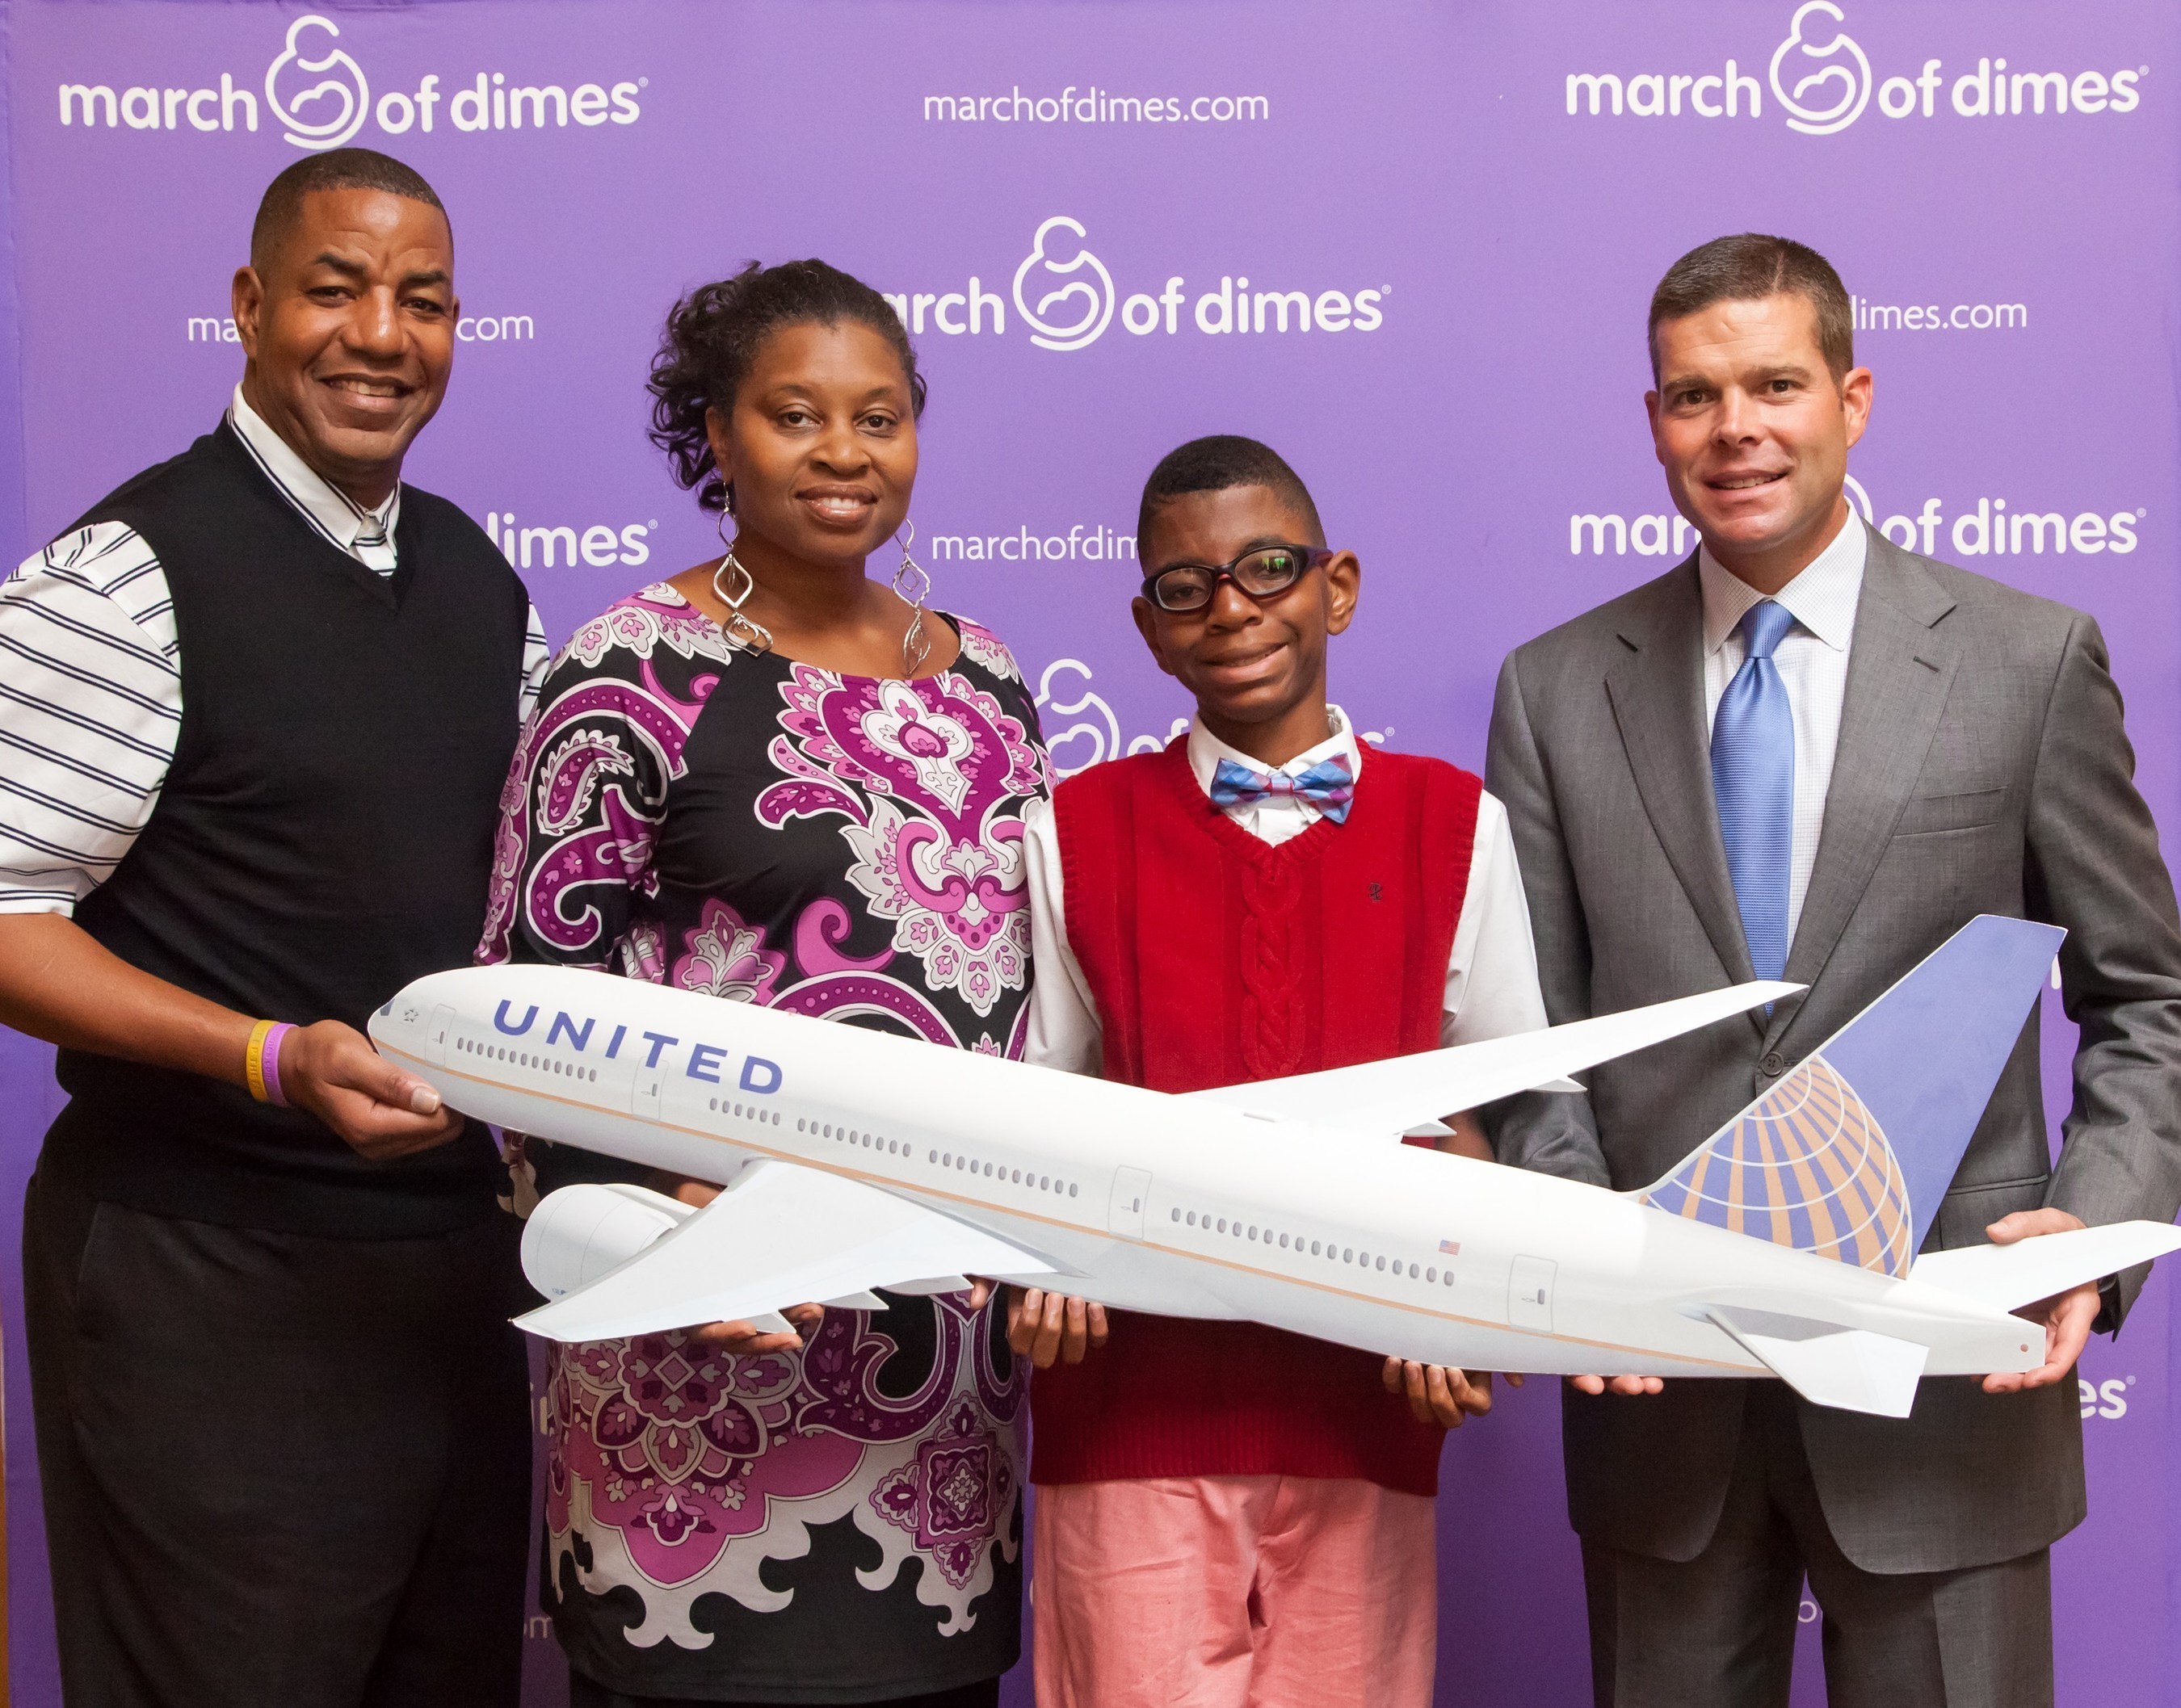 2015 March of Dimes Ambassador family Todd Jackson, United Airlines employee Elise Jackson and son Elijah with United Airlines Executive Vice President, Chief Financial Officer and 2015 March for Babies National Chairman John Rainey